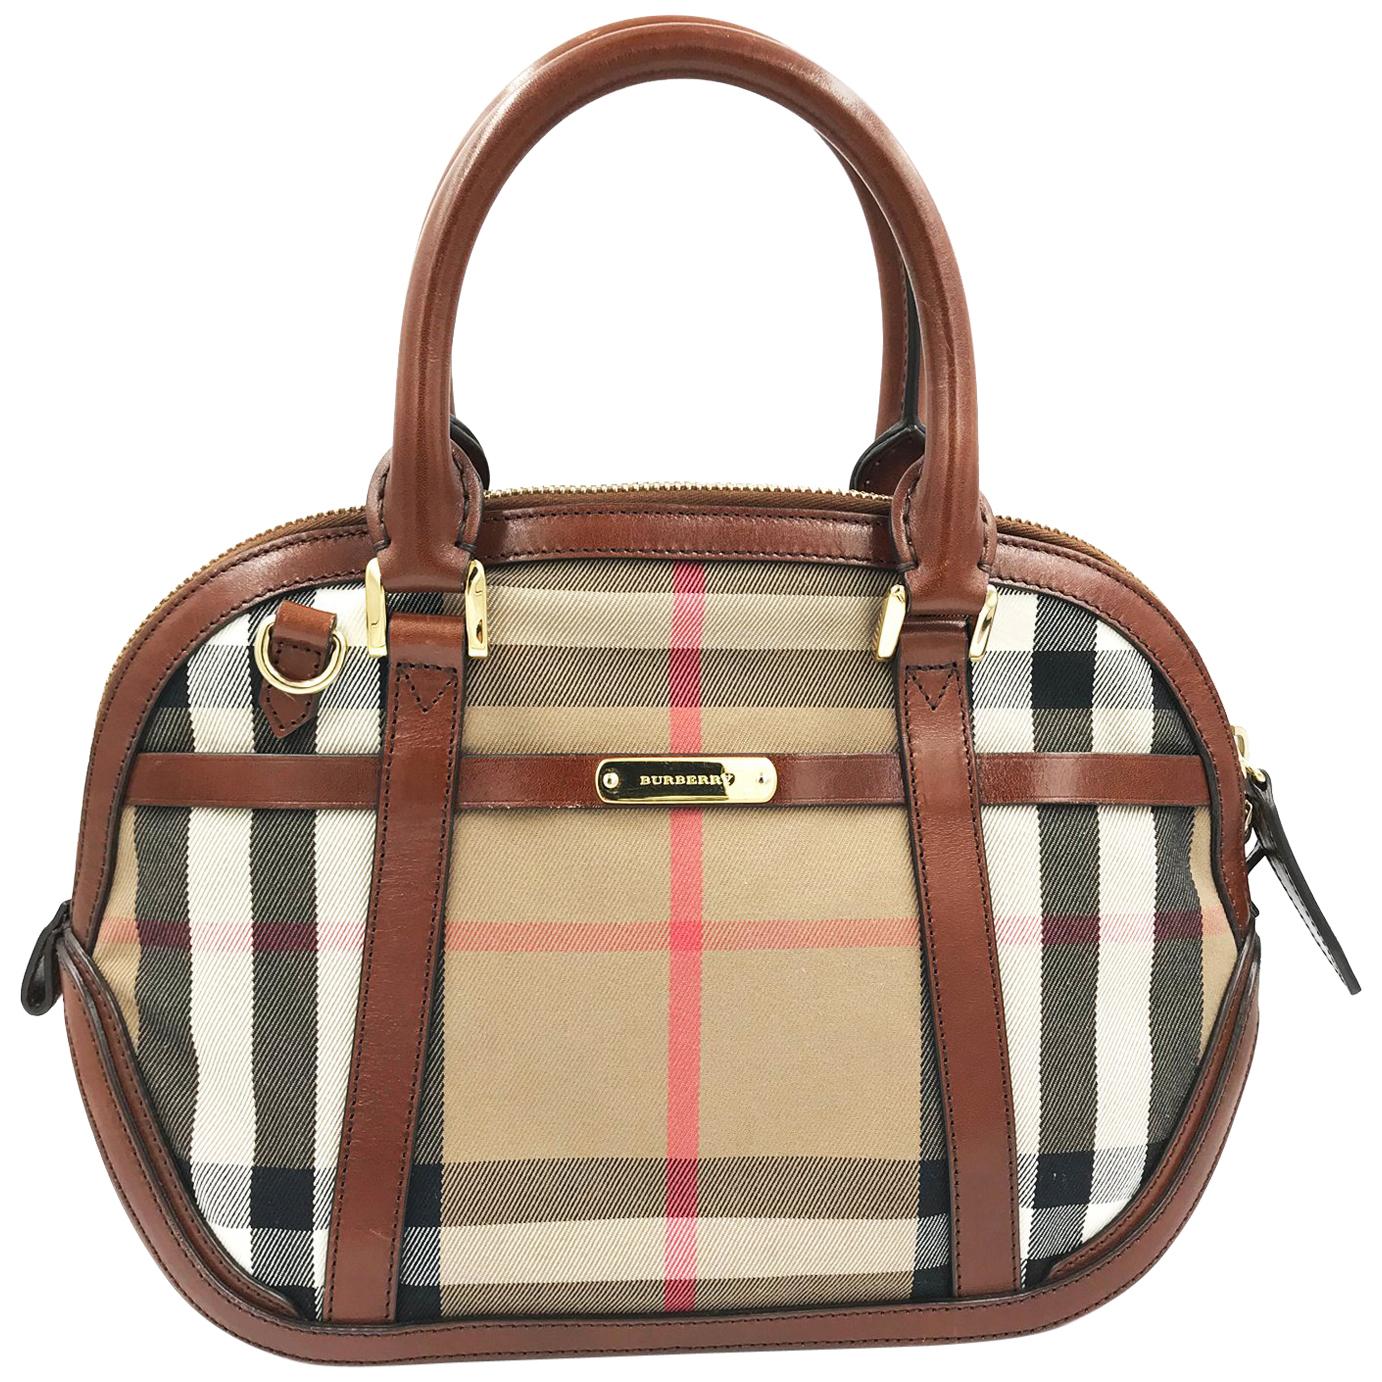 Burberry Small Orchard Dark Tan Ladies Tote Bag 3853773.A